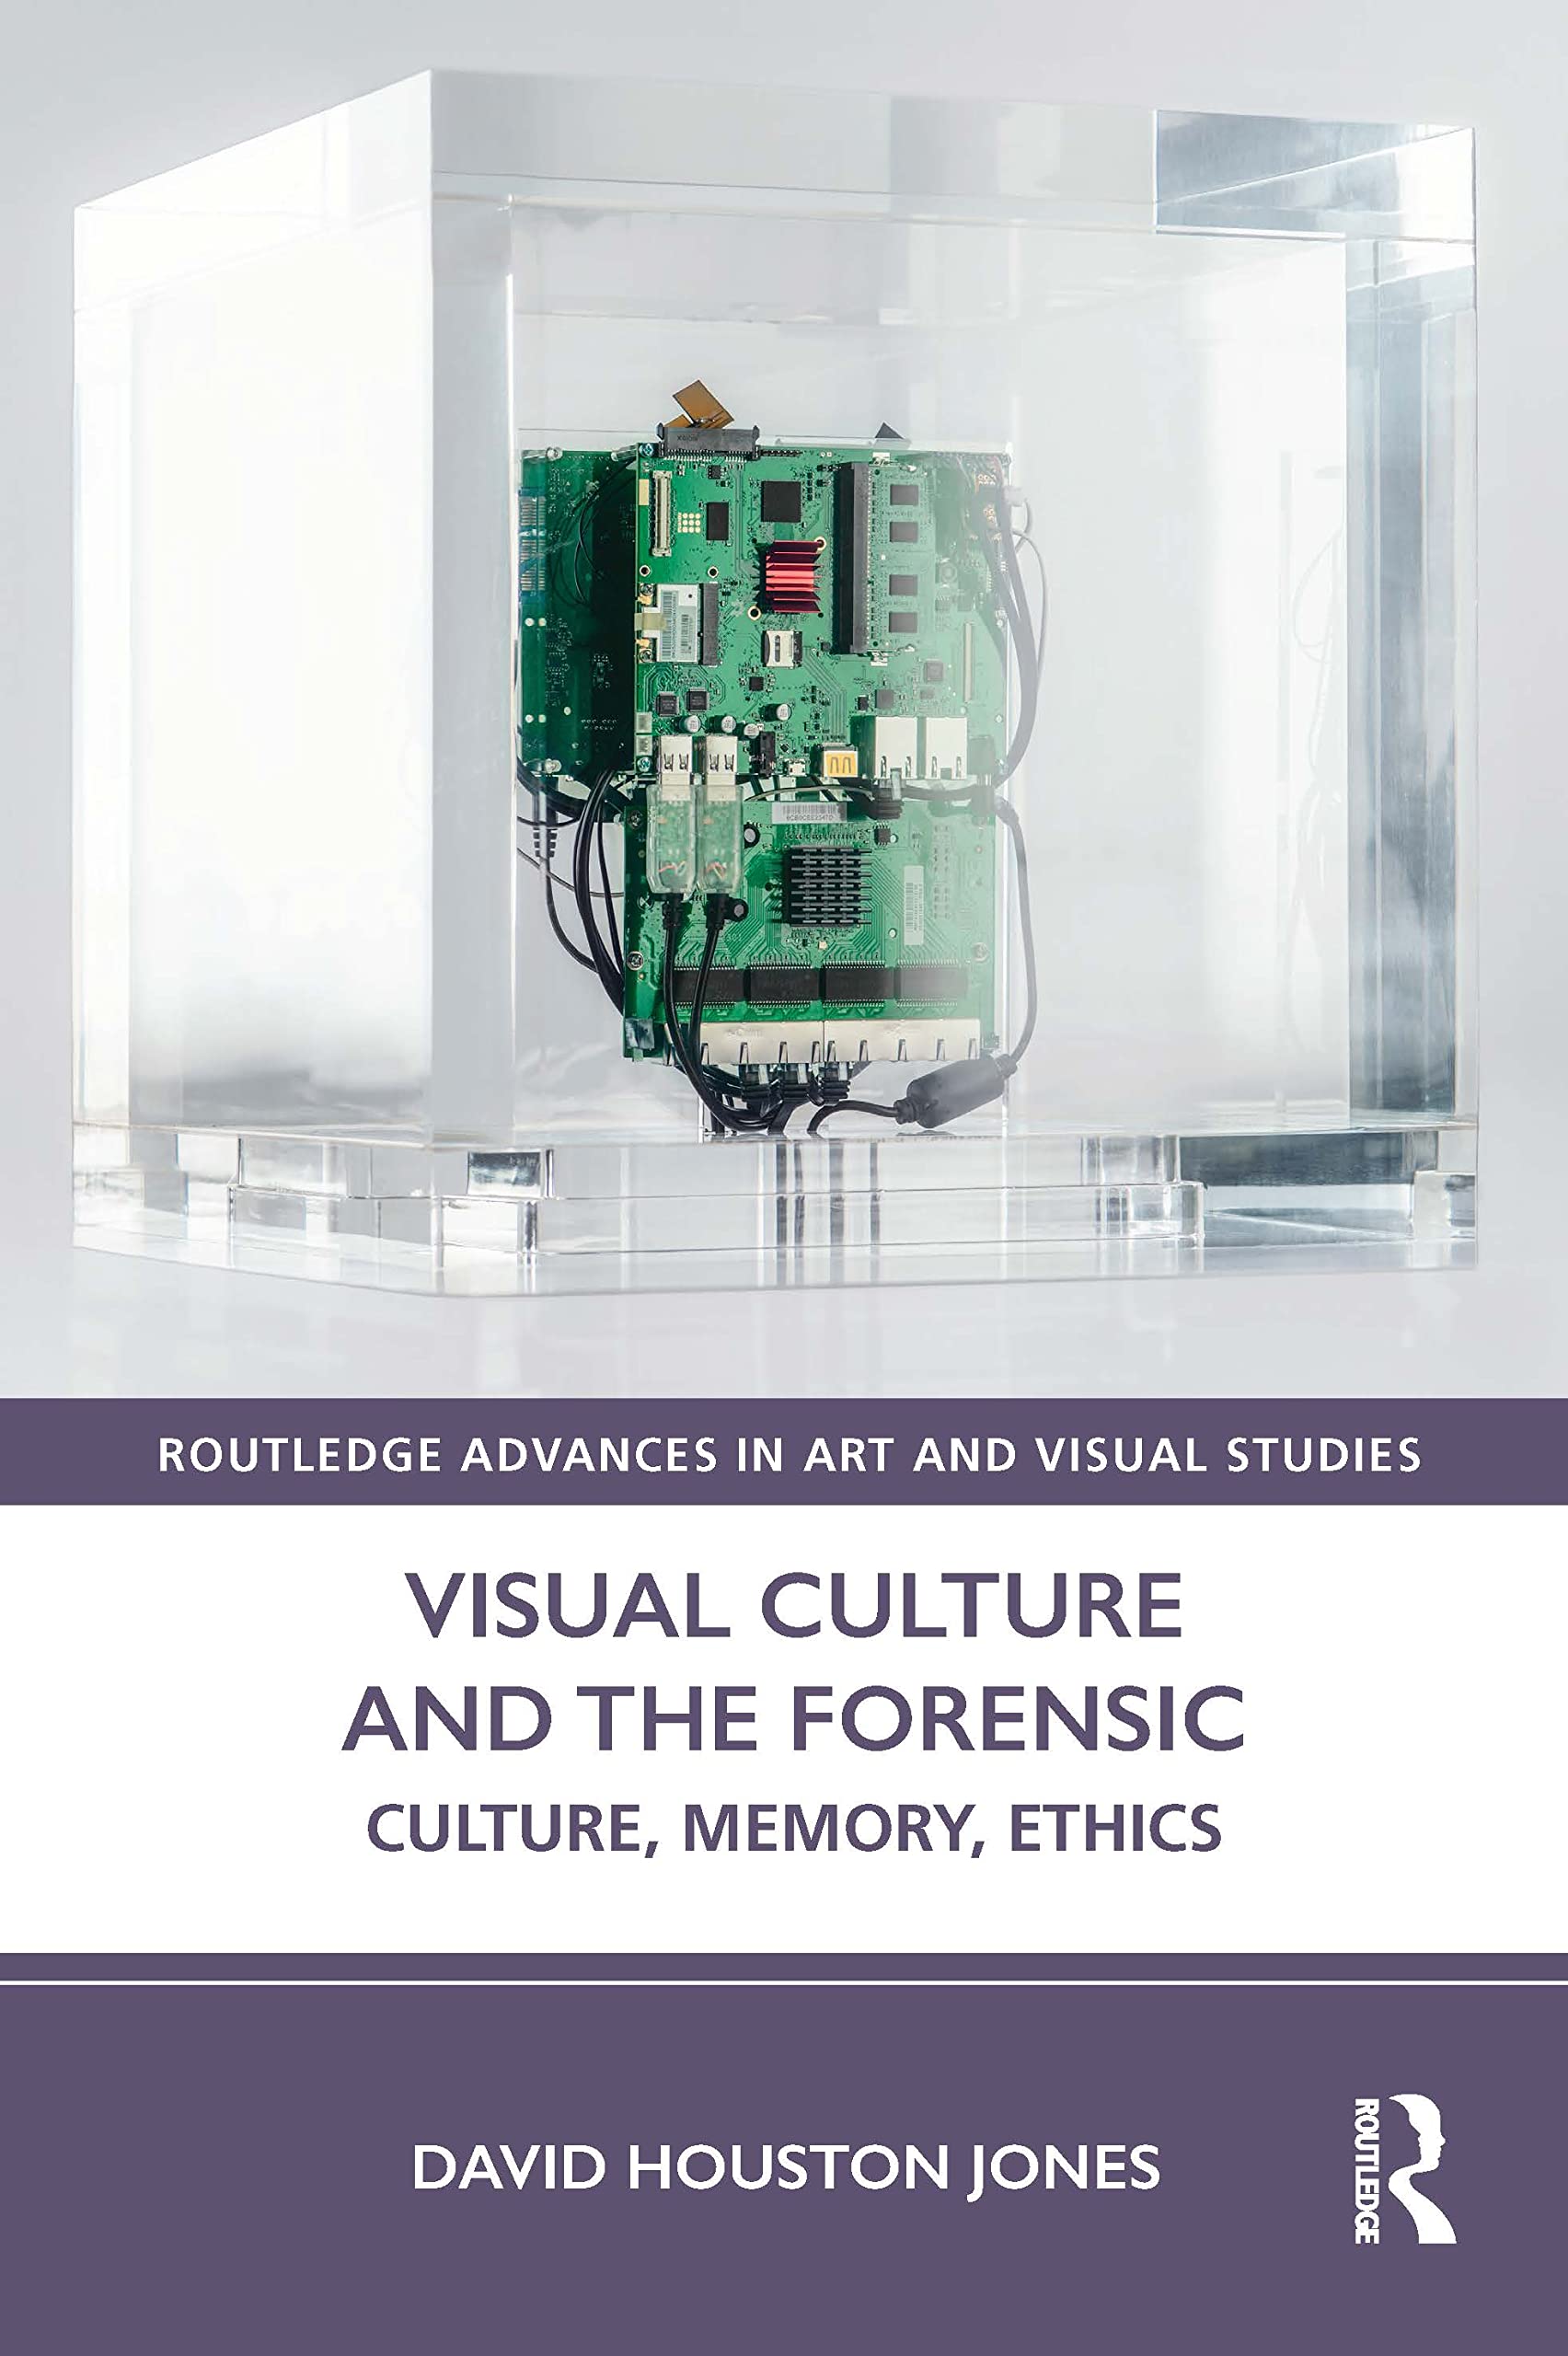 Cover of Jones' book featuring an image of a computer memory board of some kind inside a clear glass or plastic box, beneath which the title is printed.